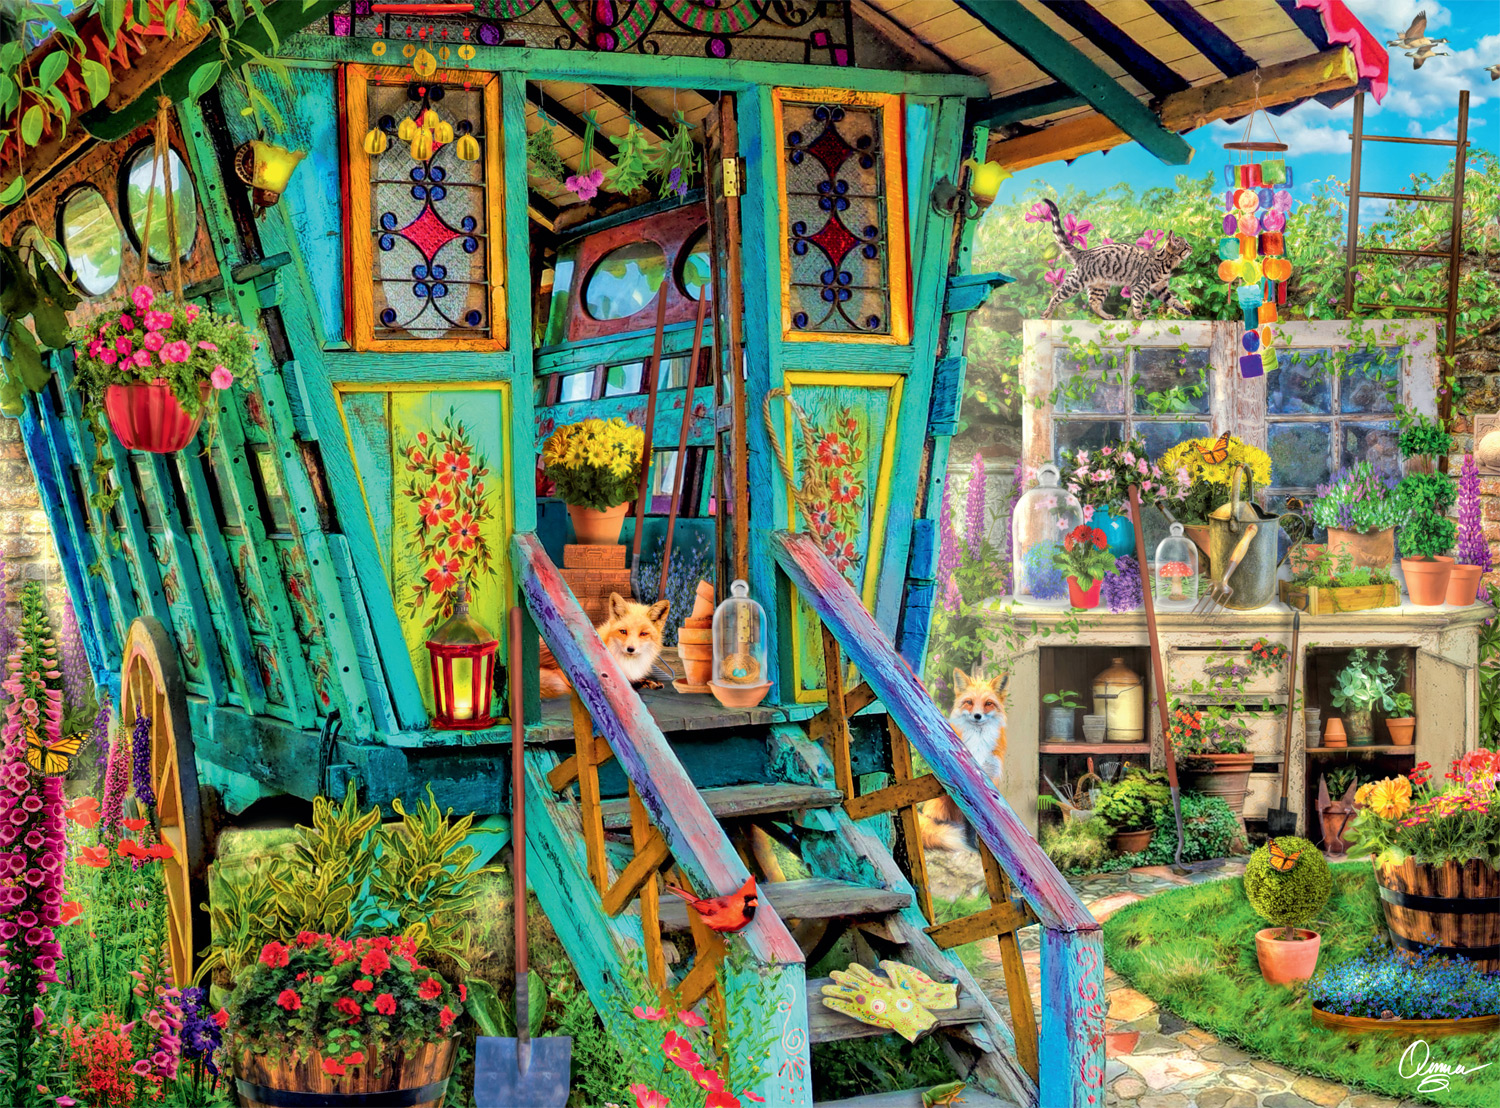 The Potting Shed Animals Jigsaw Puzzle